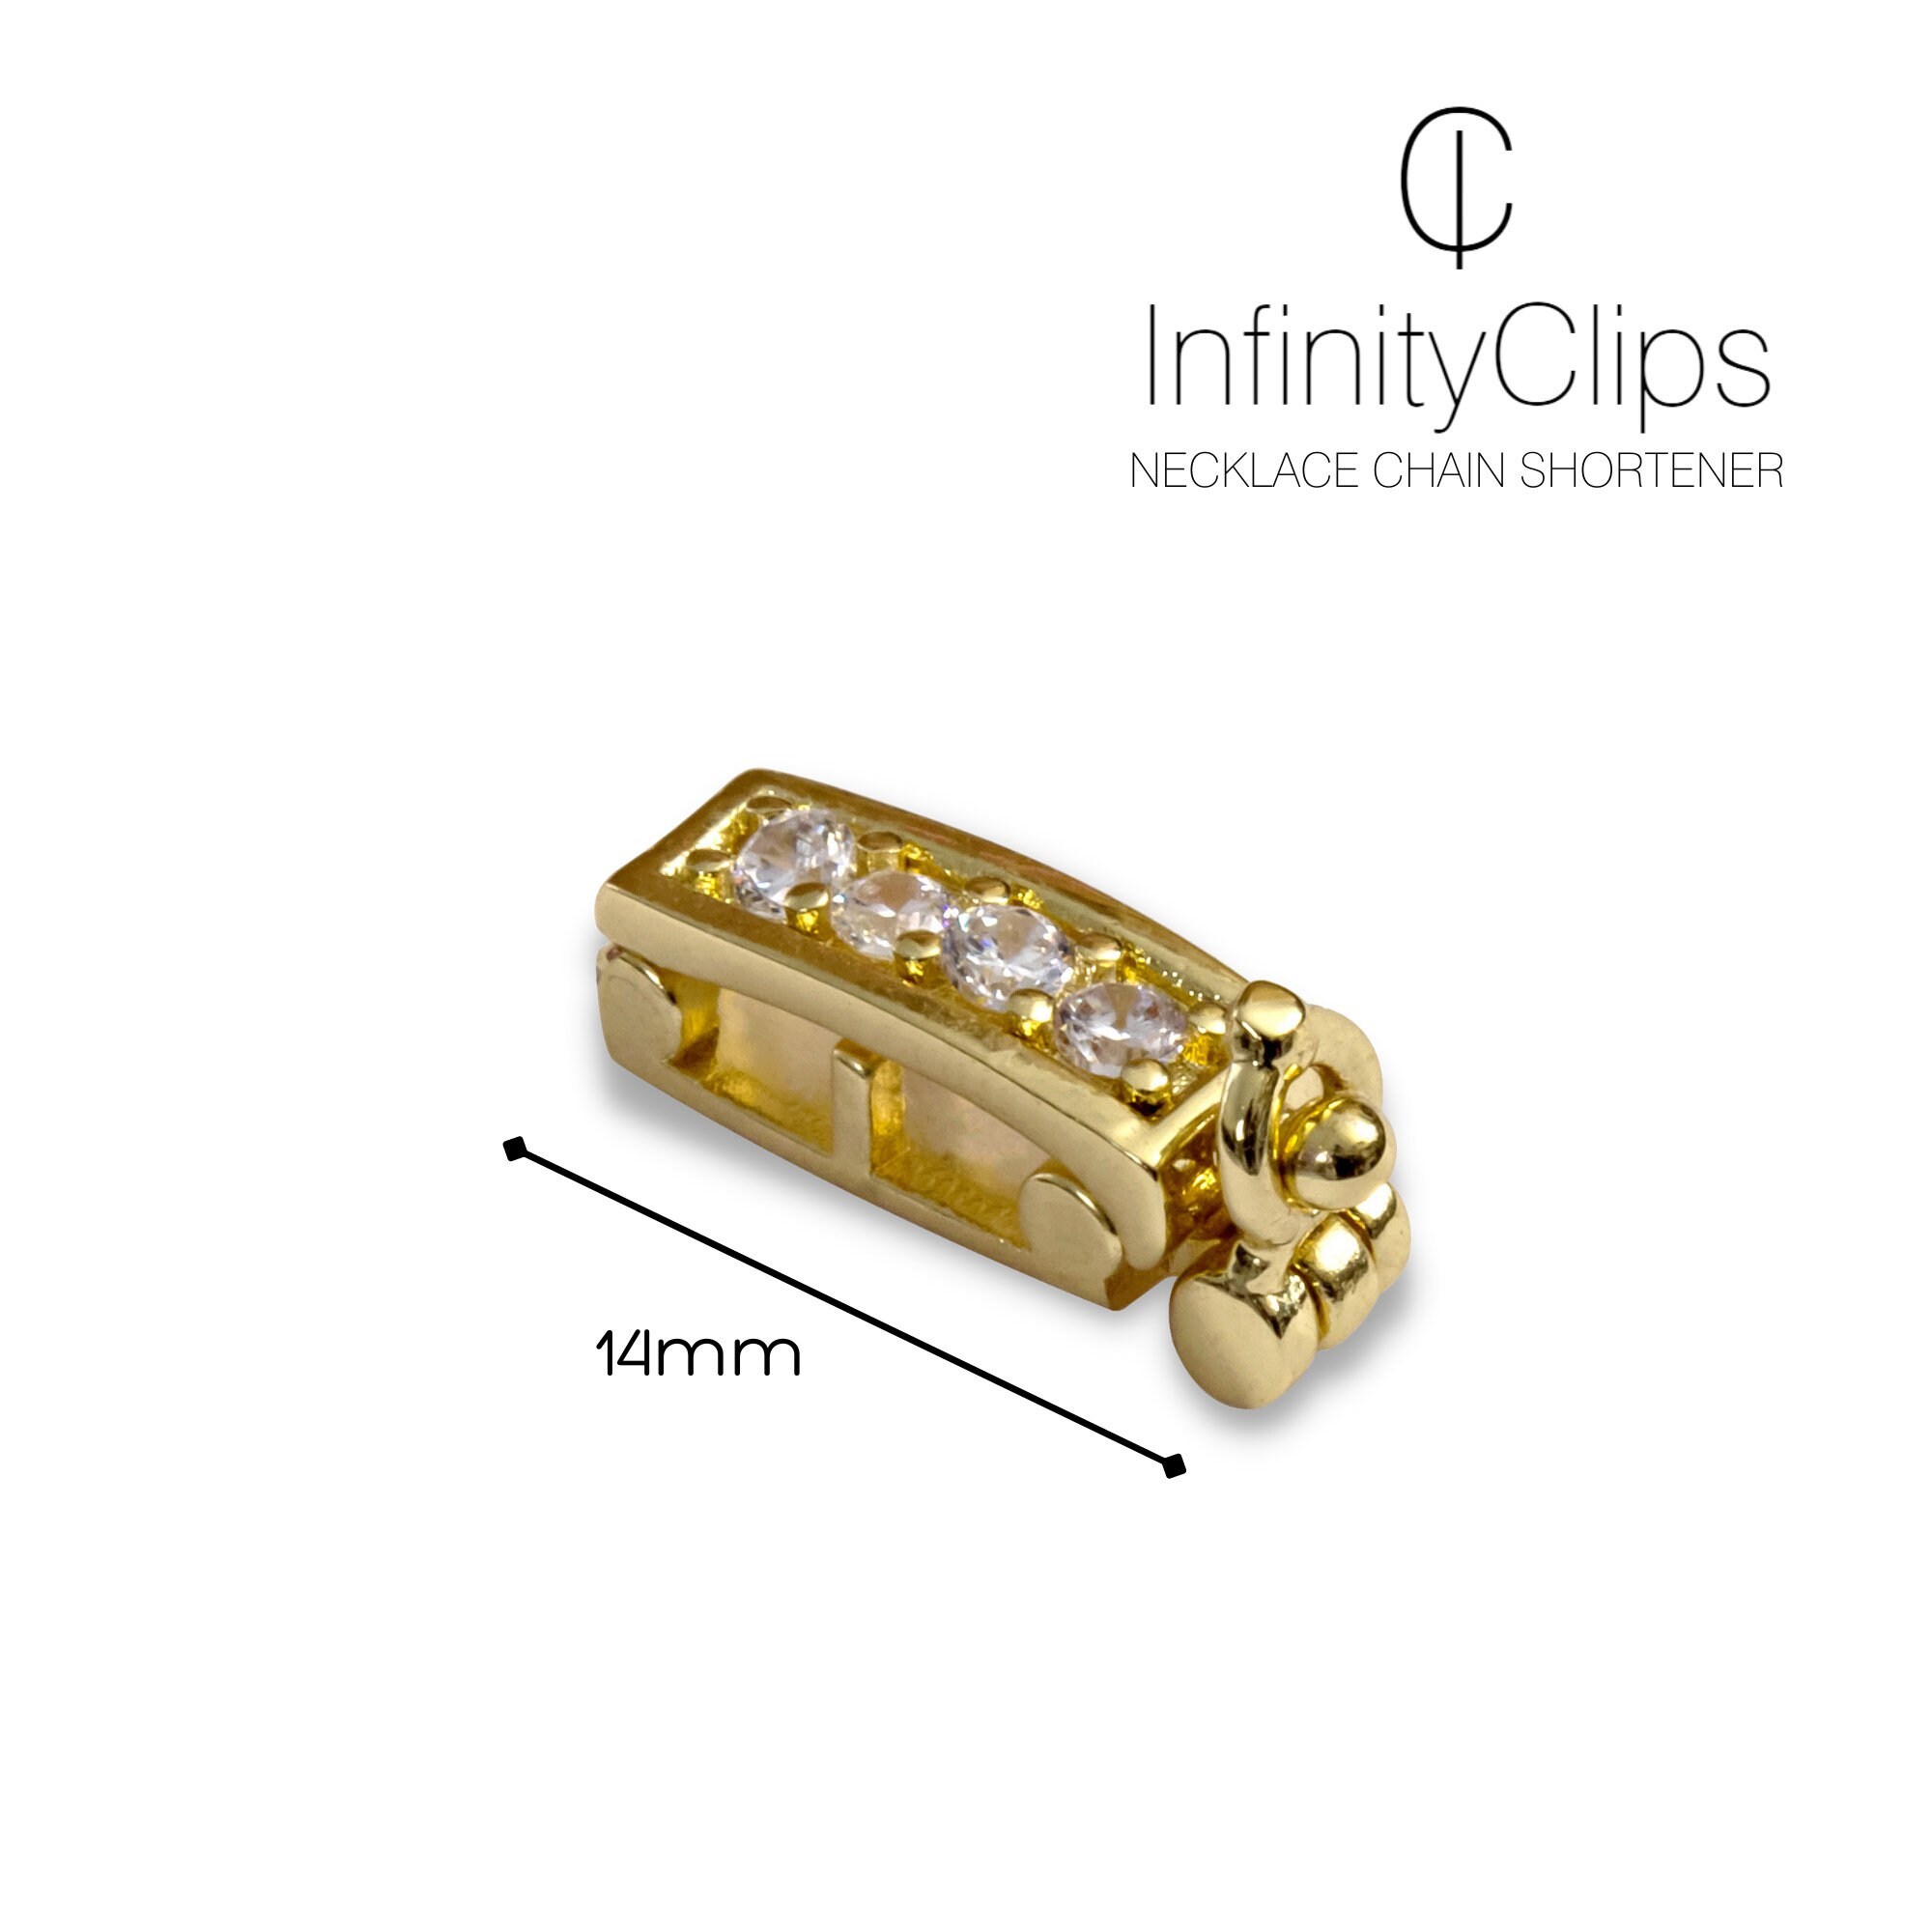 Buy Infinity Clips Small Classic Rose Gold Necklace Shortener With Safety  Clasp, Chain Shortener, Clasp for Necklace Online in India - Etsy